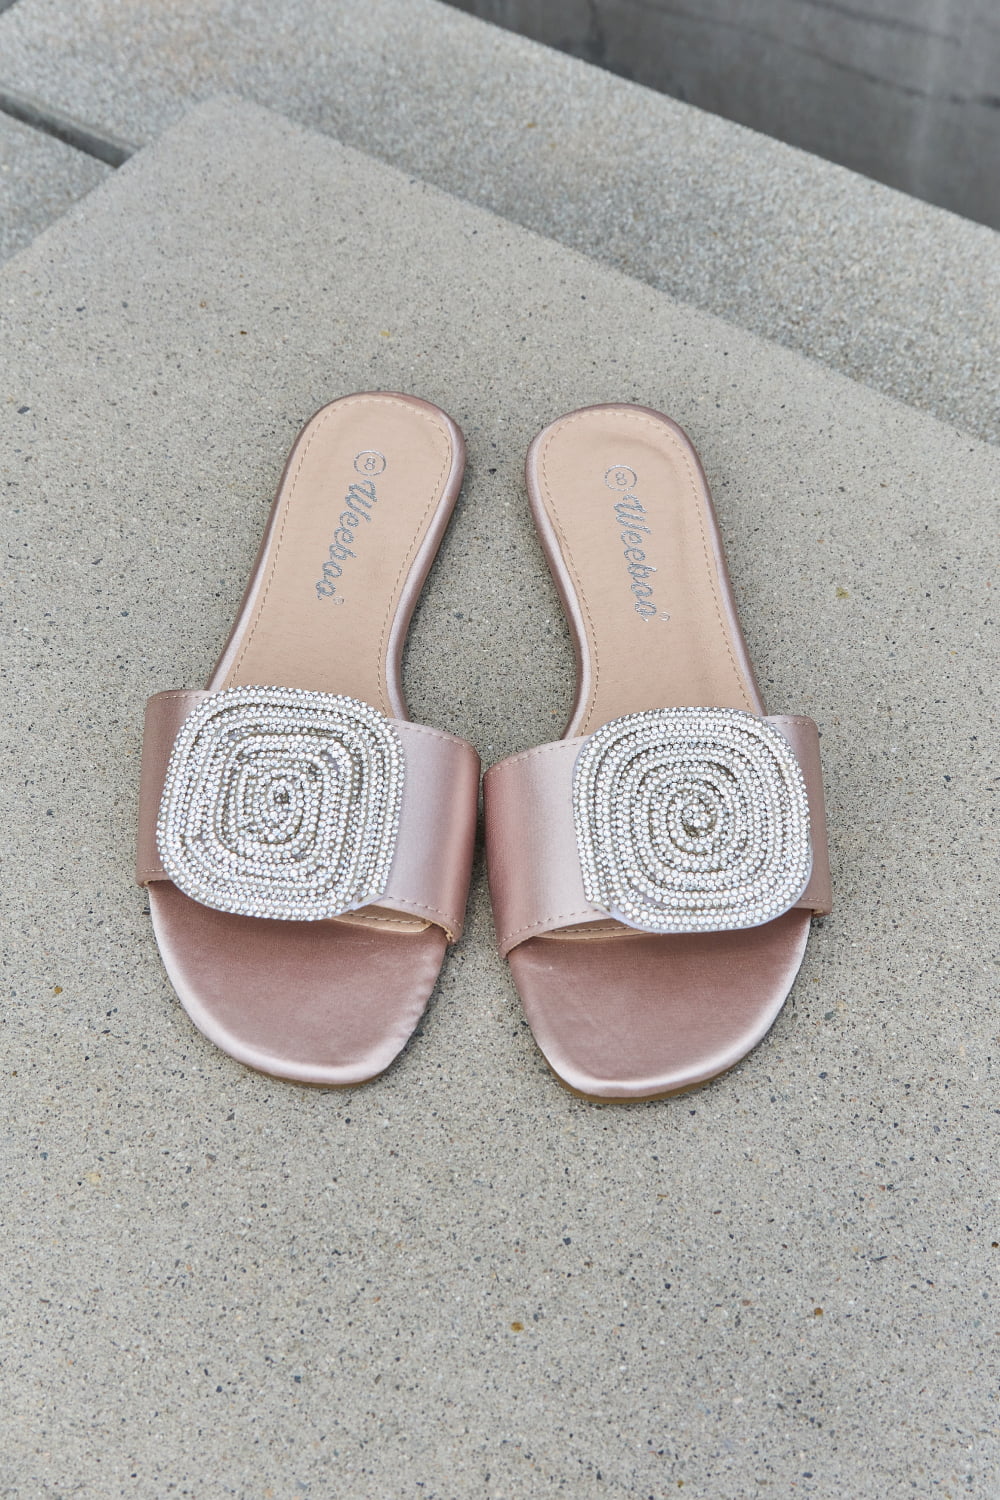 Weeboo Slide On Bedazzled Accented Slip On Flat Sandals in Nude Color New Day